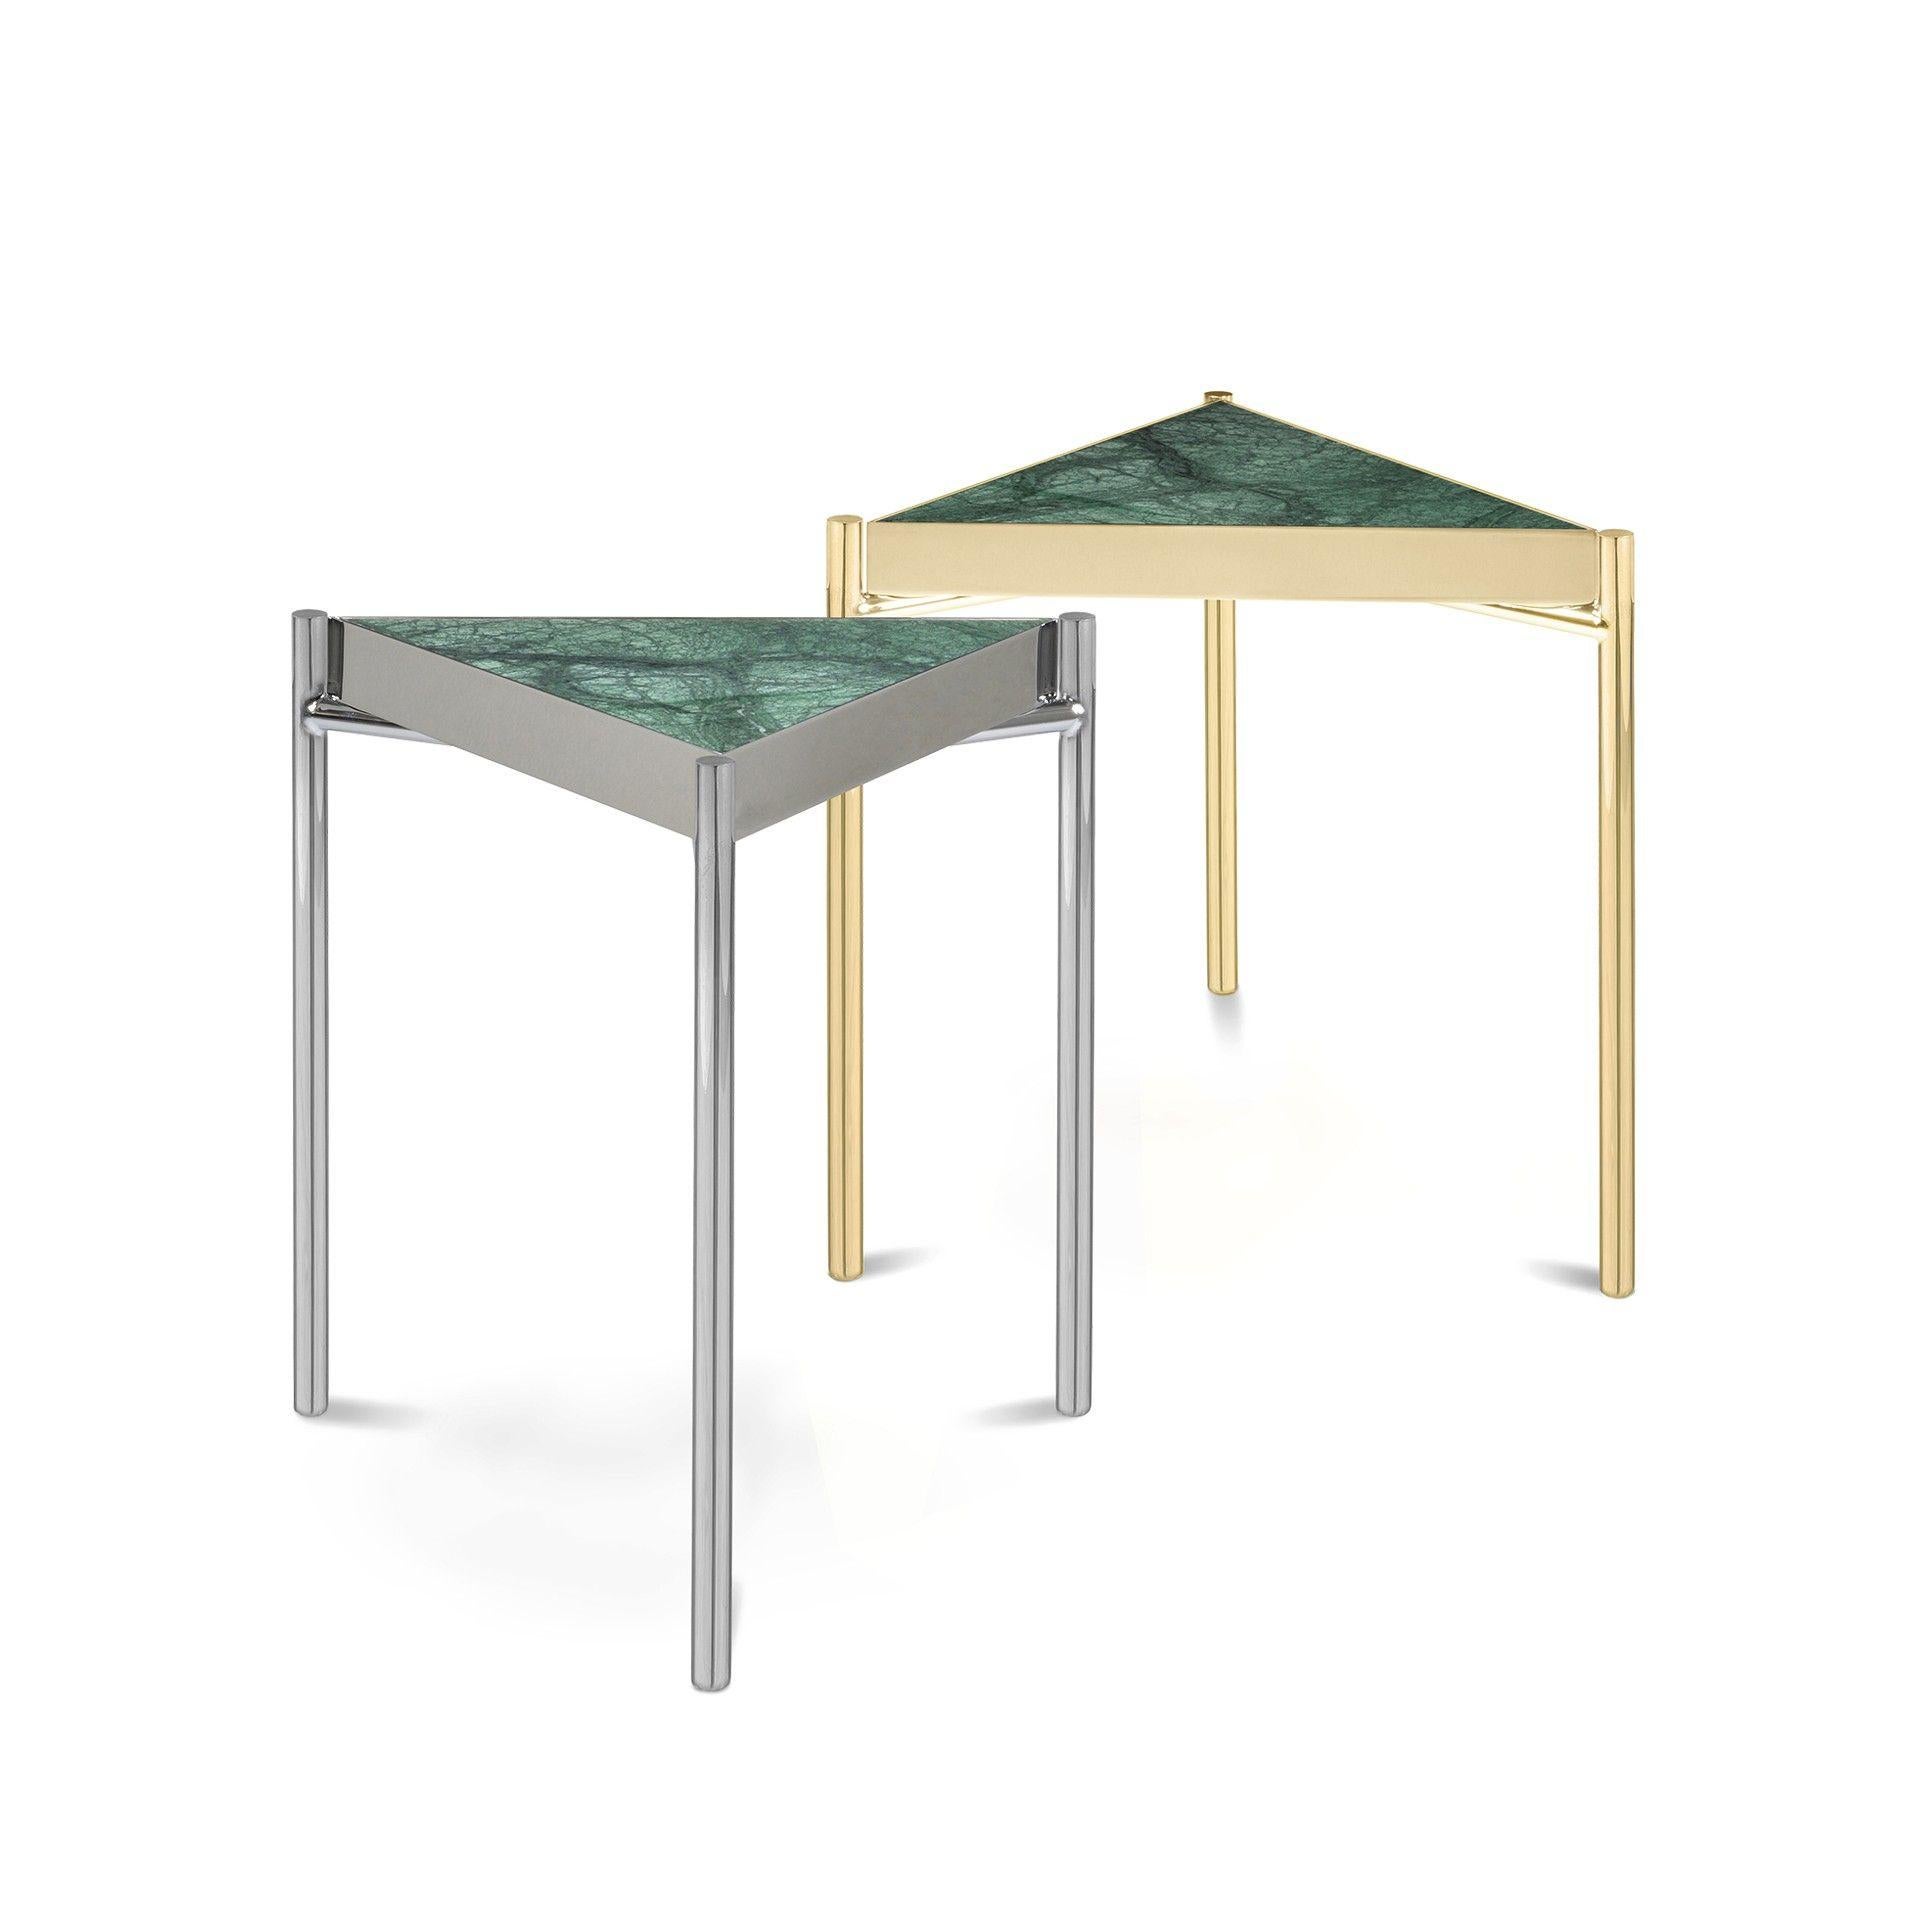 This simple, elegant,  geometrically shaped table is inspired by the work of the artist Kandinsky. 
Indian Green Marble top and a full thin titanium Gold base.
It looks like the table top is floating as the structure always gives the feeling of